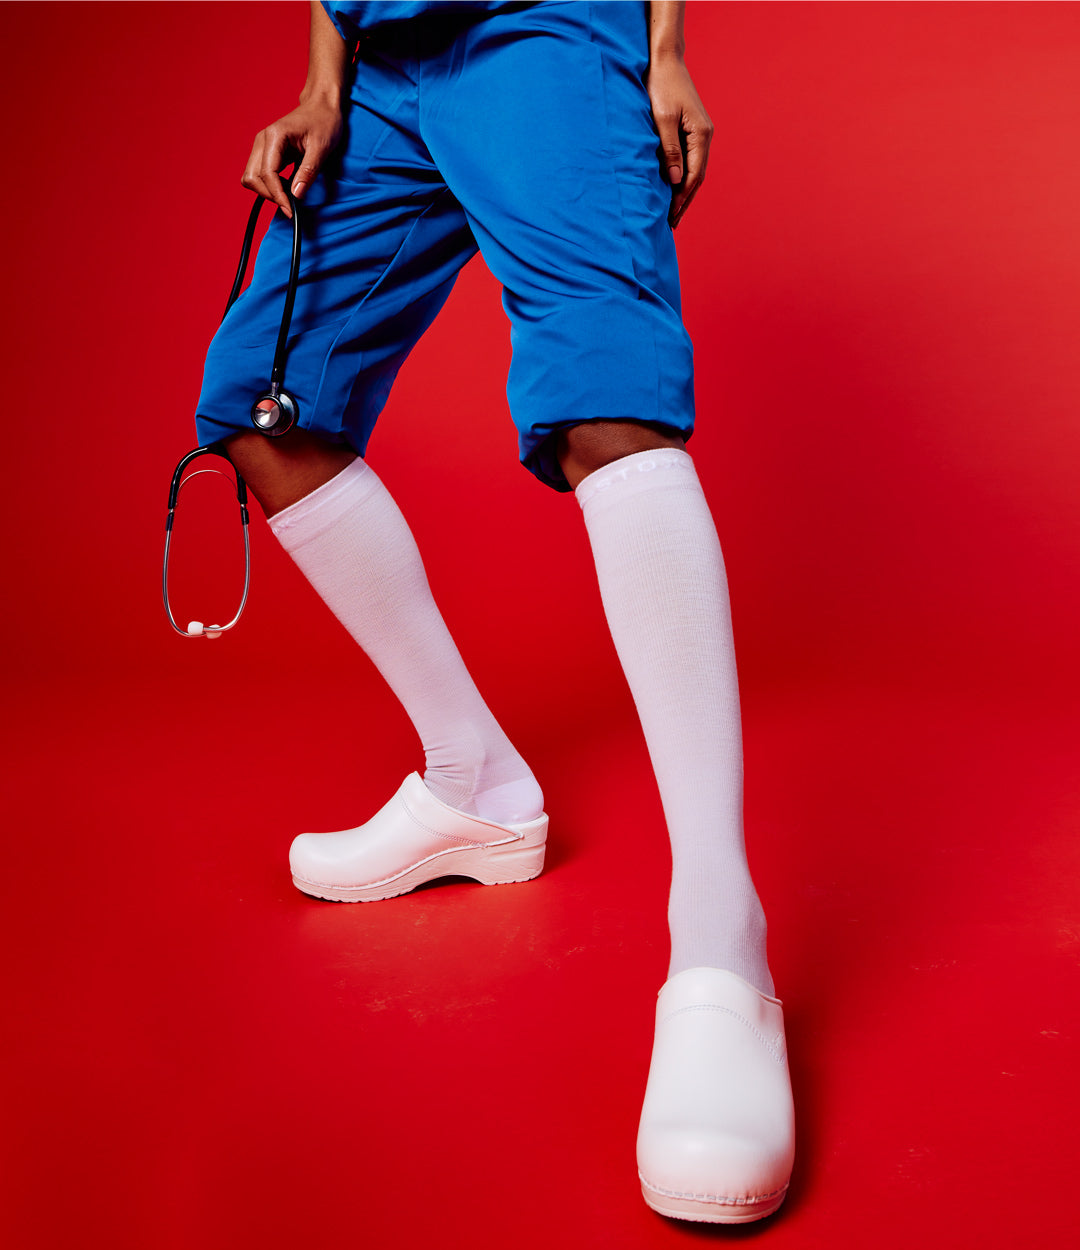 Hamstring pain? Try compression stockings